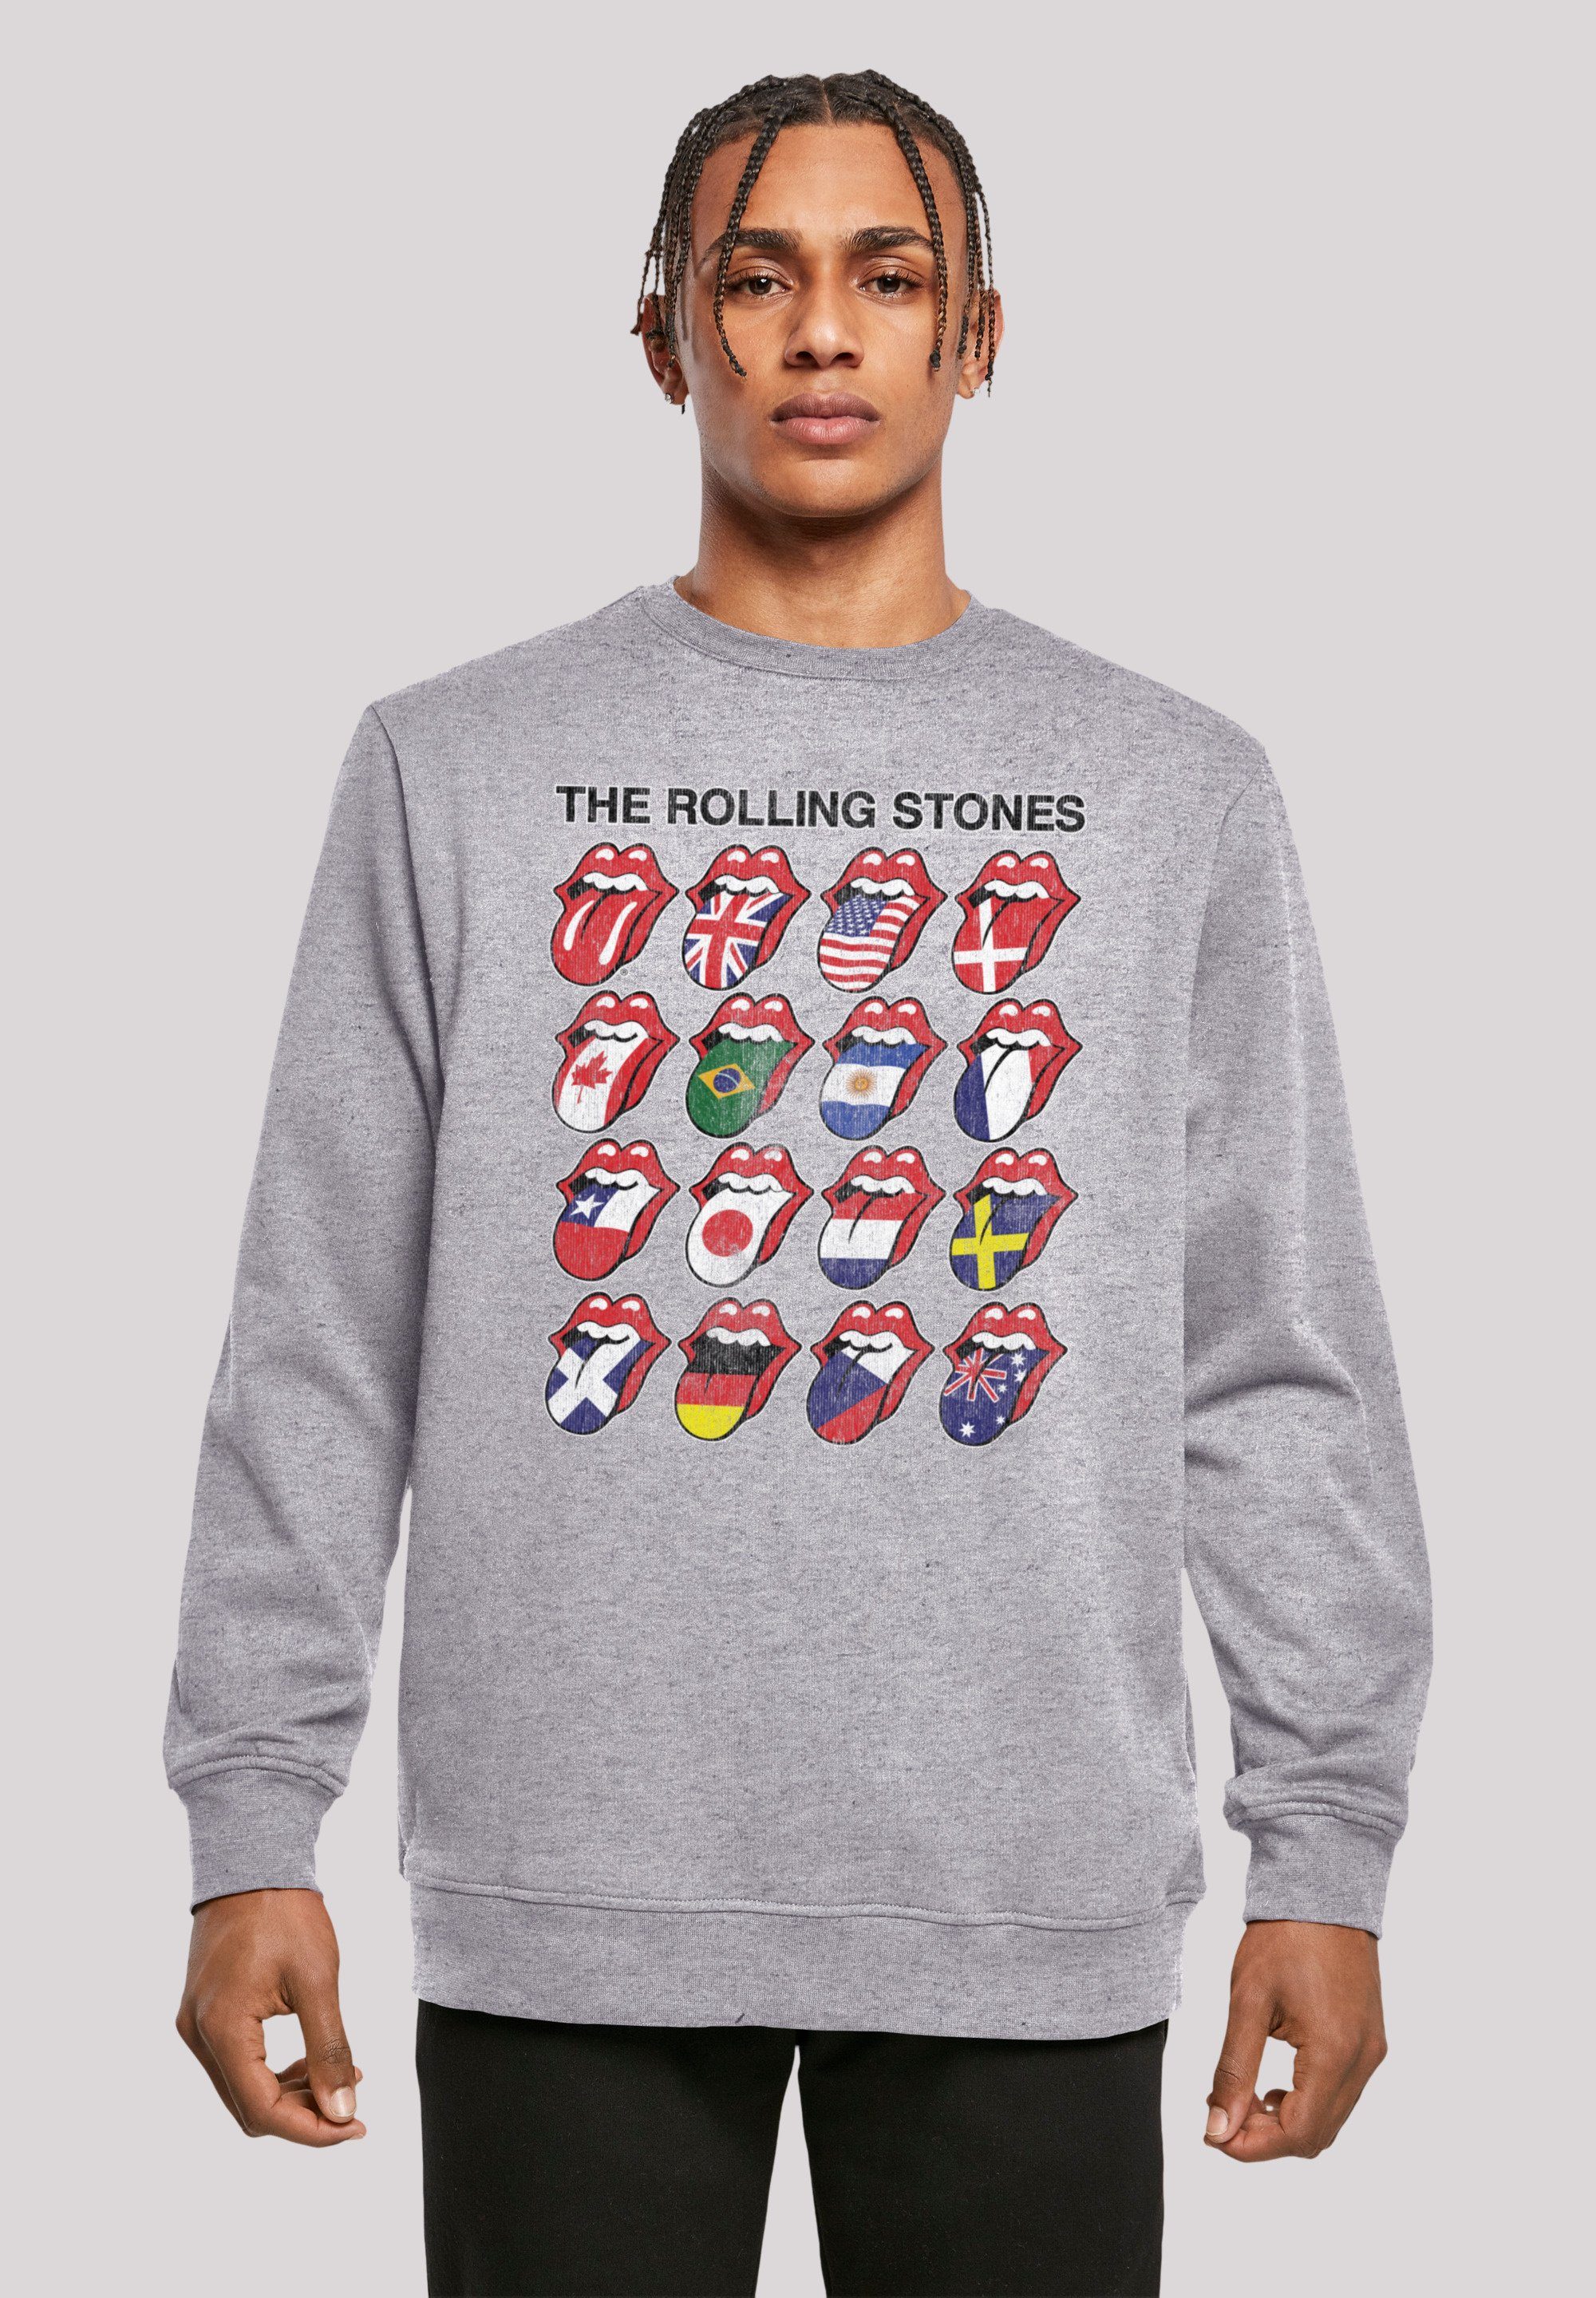 lizenziertes Offiziell Rolling Rolling Voodoo Tongues Musik, Stones The Band, Lounge Stones Sweatshirt Logo, Sweatshirt F4NT4STIC